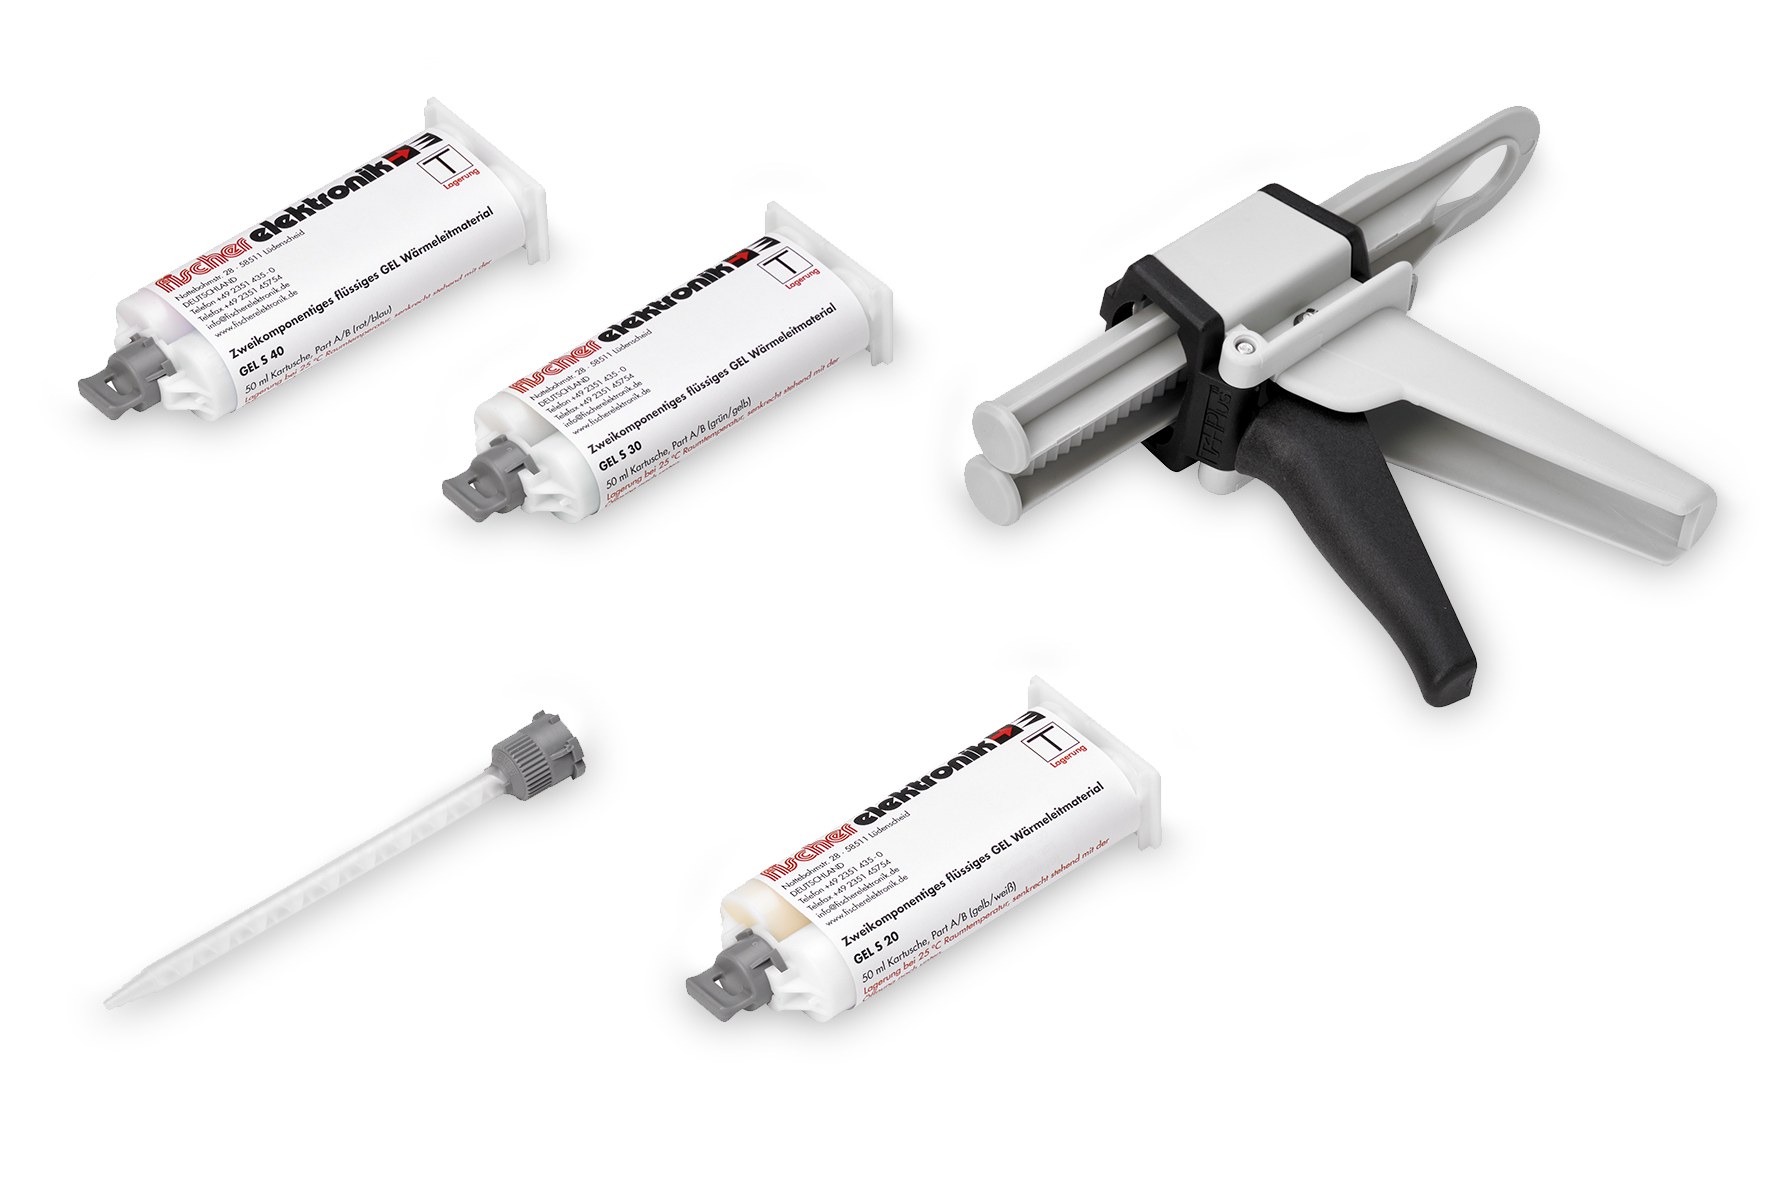 Thermaly conductive paste from FISCHER ELEKTRONIK